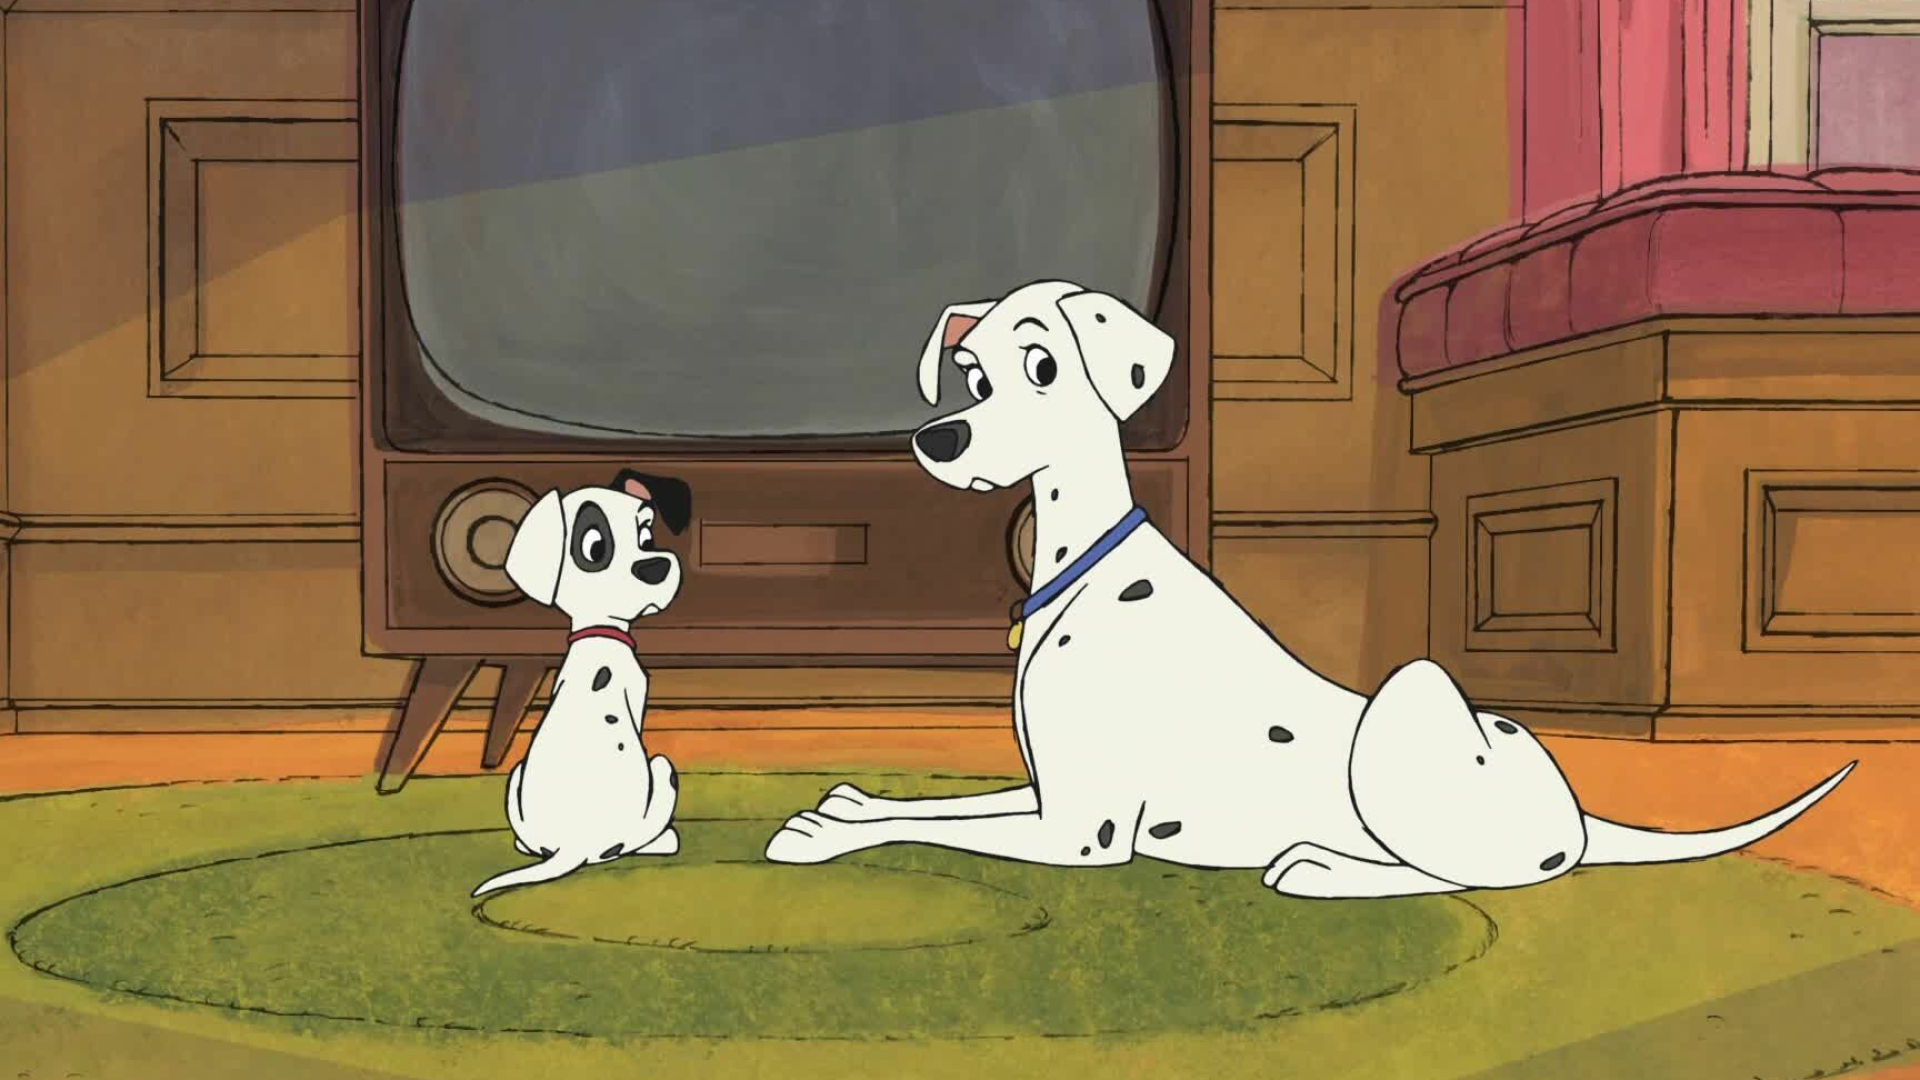 One Hundred and One Dalmatians: The 1961 animated classic sees Pongo and Perdita, set out on a journey to rescue their pups – and whilst doing so, end up saving 84 additional puppies, bringing the total of Dalmatians to 101. 1920x1080 Full HD Wallpaper.